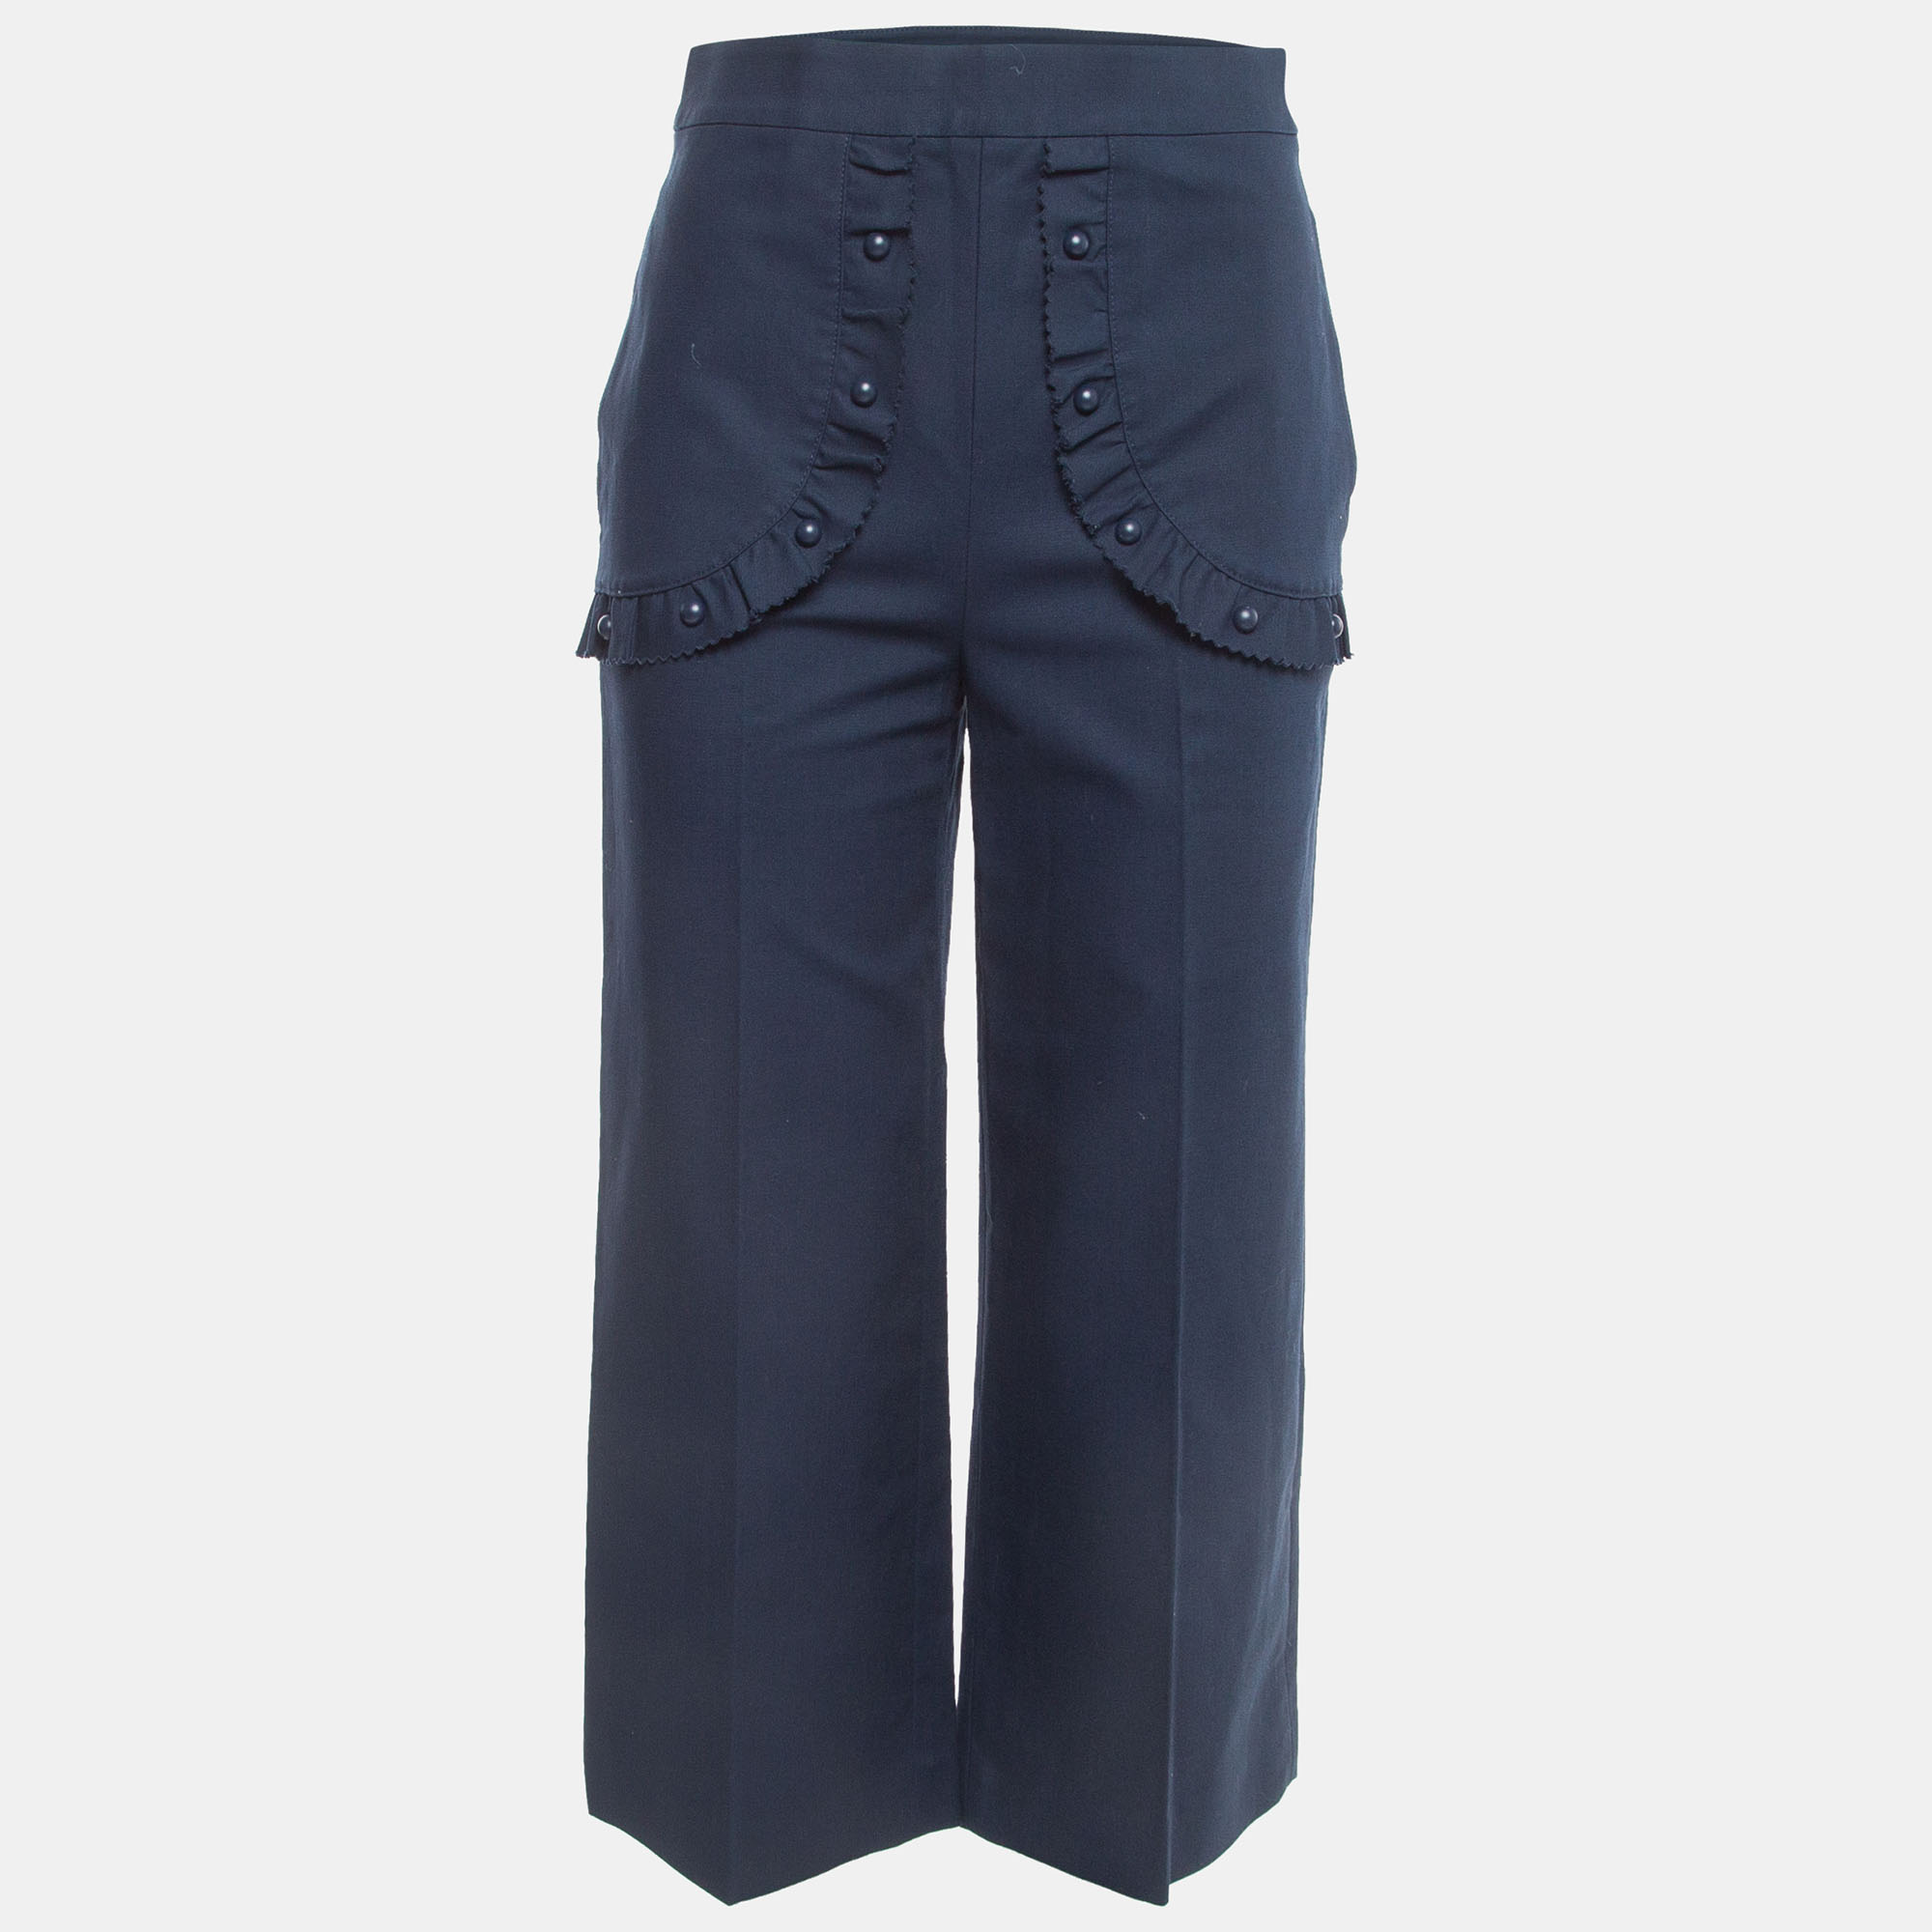 RED Valentino Navy Blue Cotton Frill Detail Culottes S